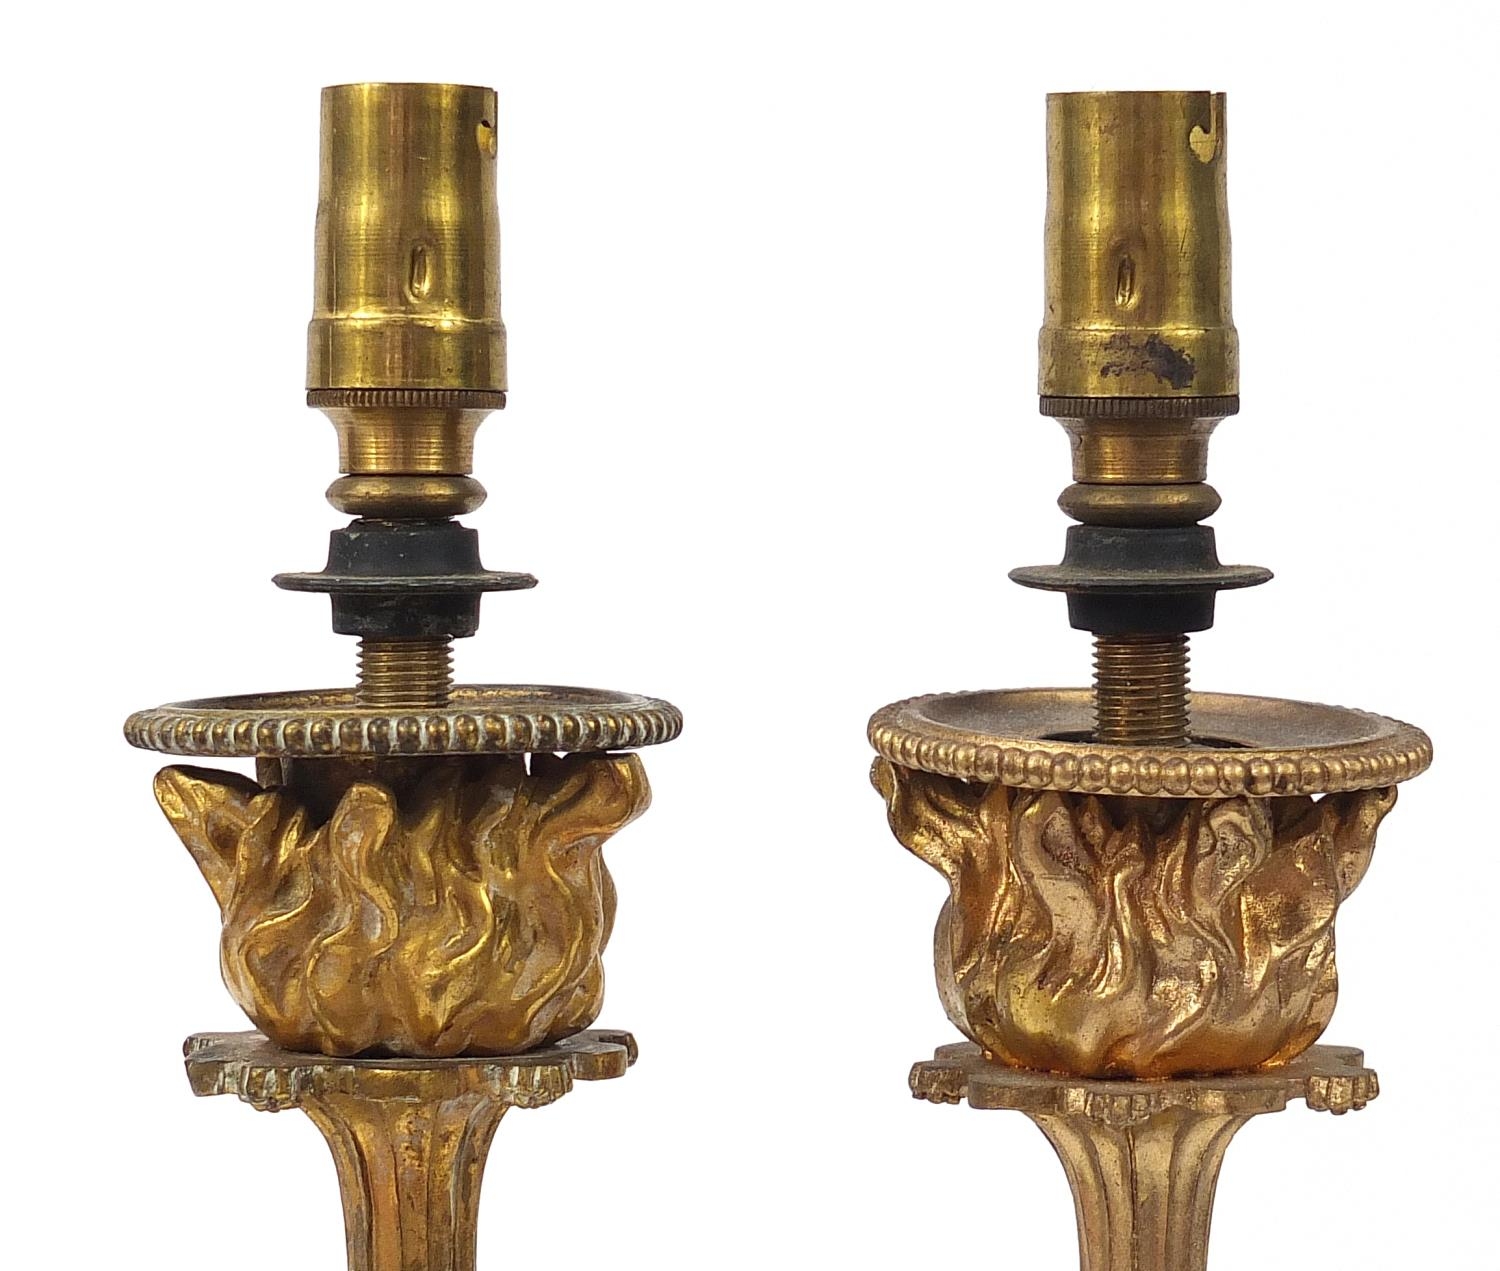 Pair of 19th century ormolu and marble Putti design two branch candelabras converted to electric - Image 4 of 7